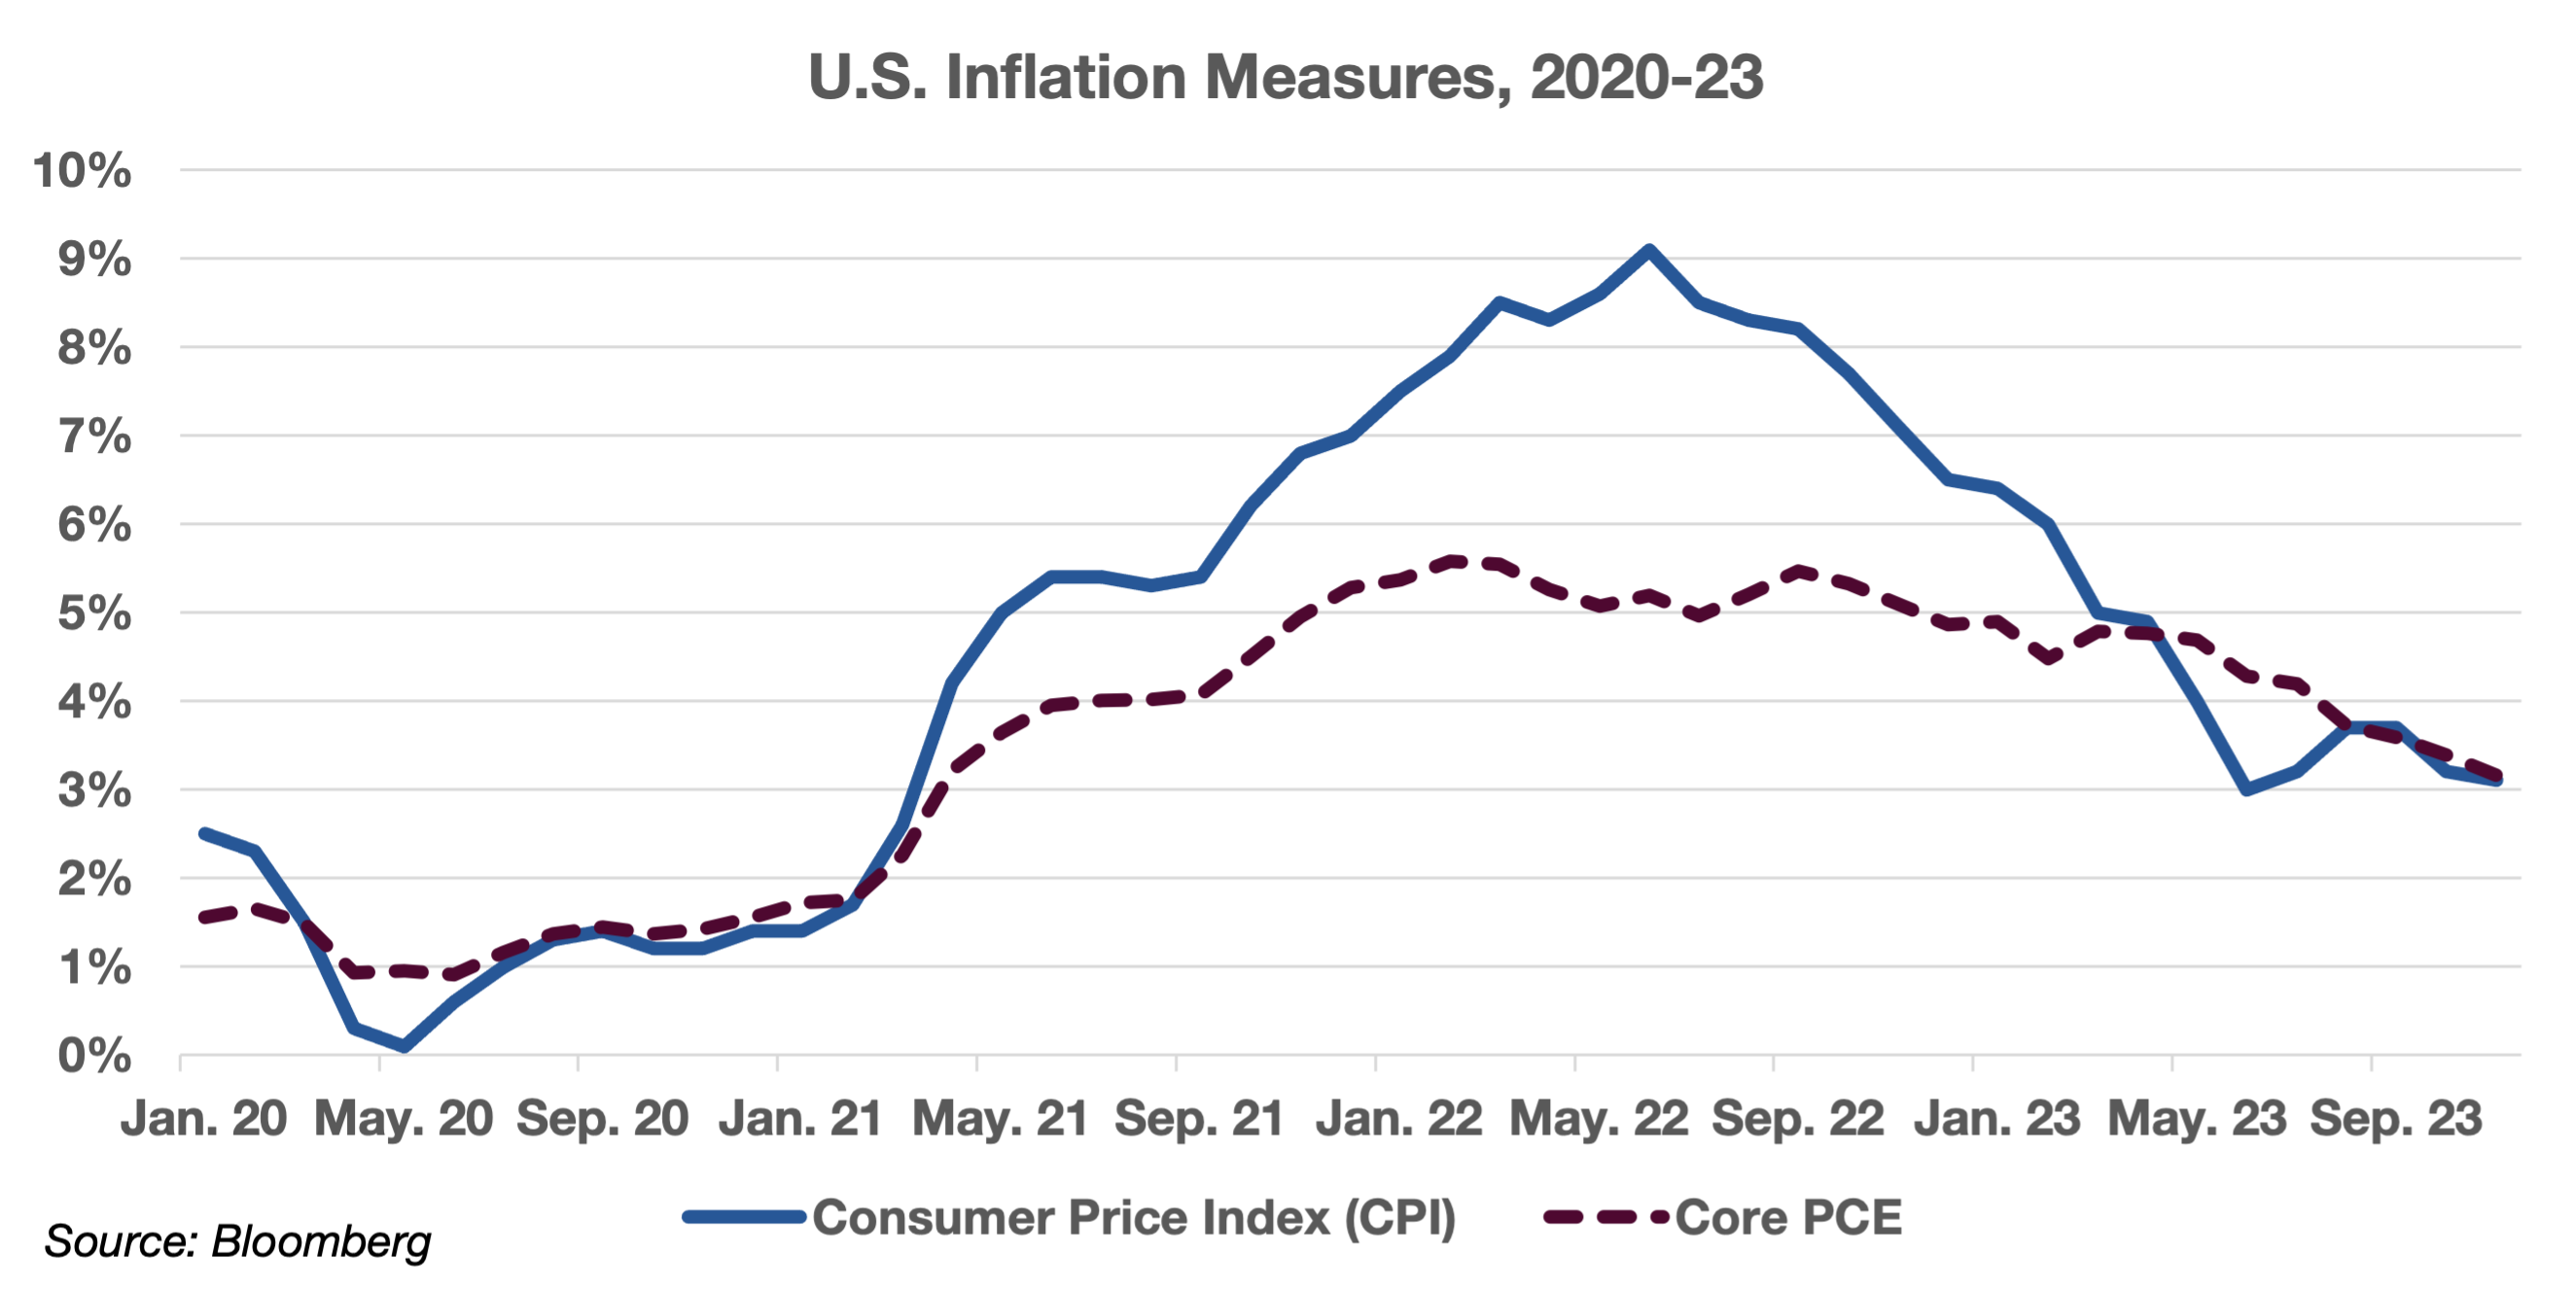 A graphic showing U.S. inflation measures increasing then decreasing between 2020 and 2023.